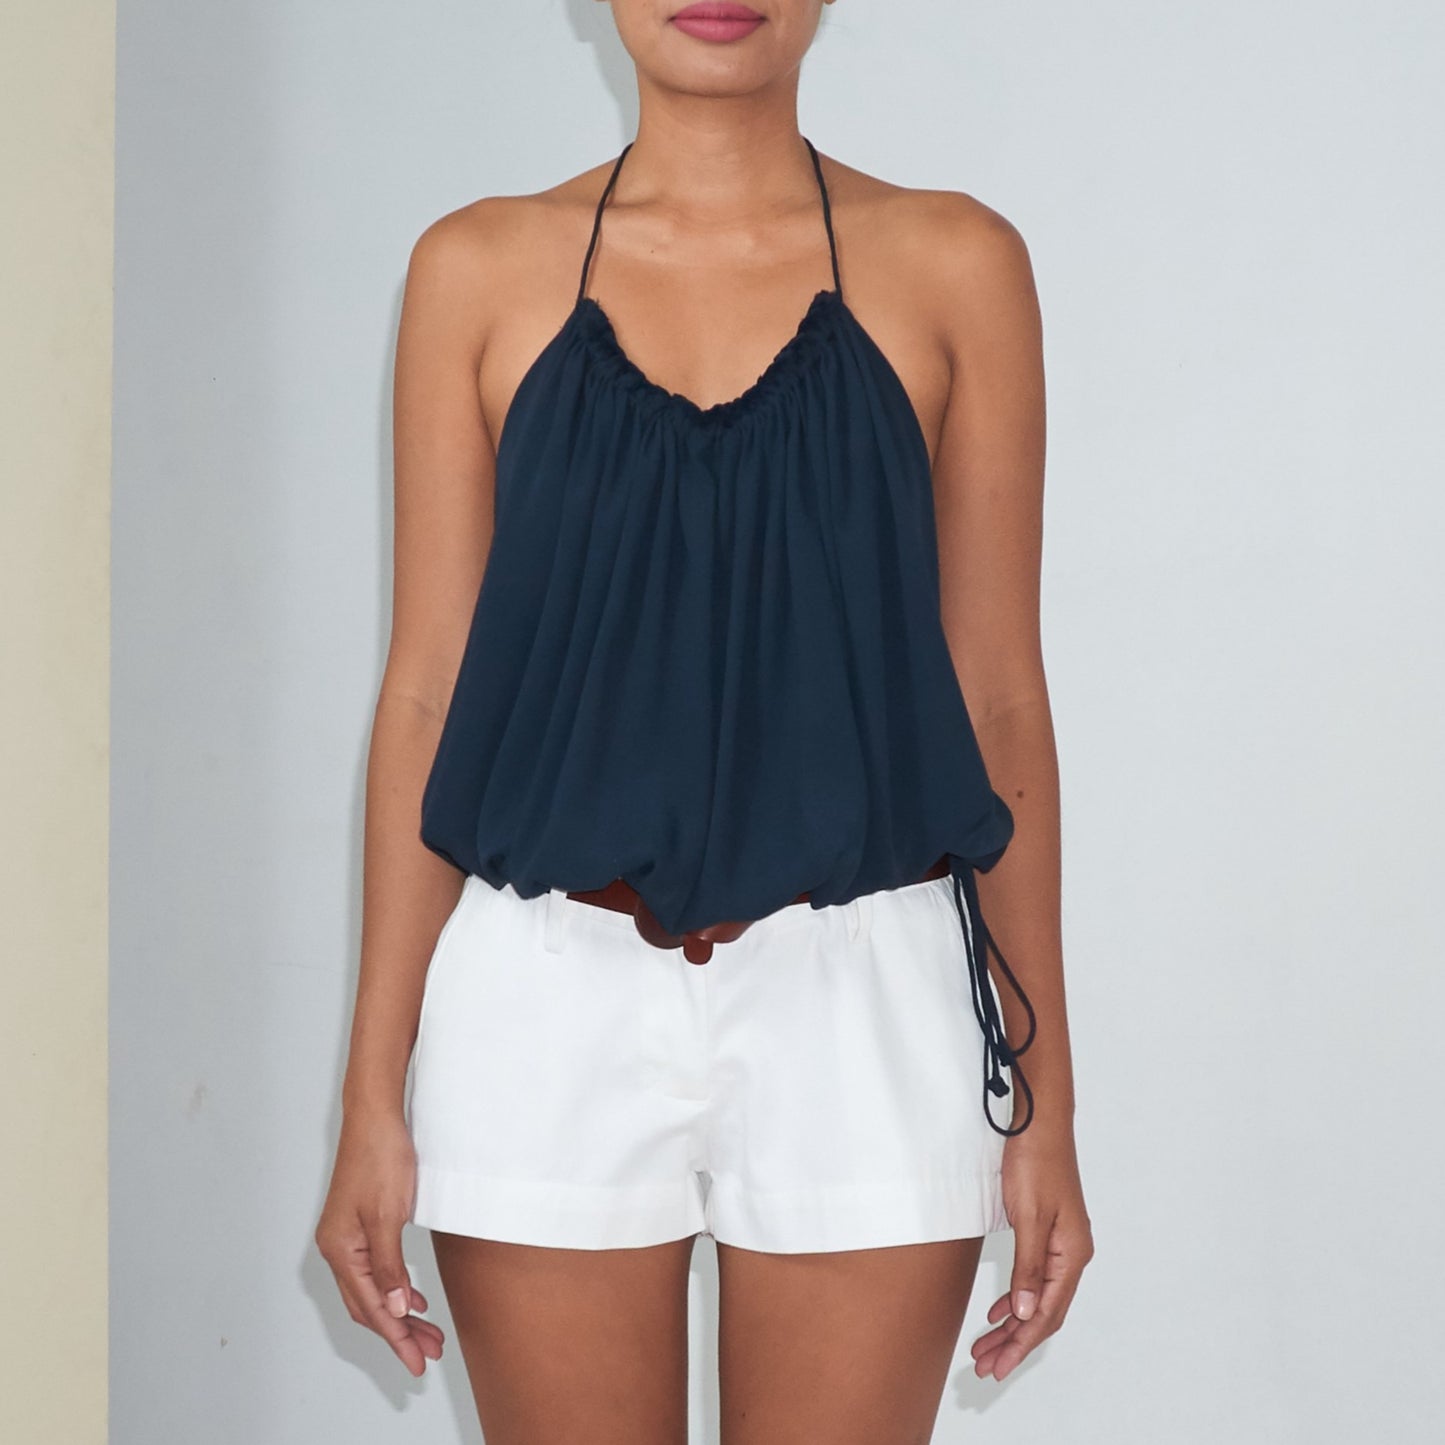 RUSH HALTER TOP - Rayon Fujette Crepe | Midnight Blue